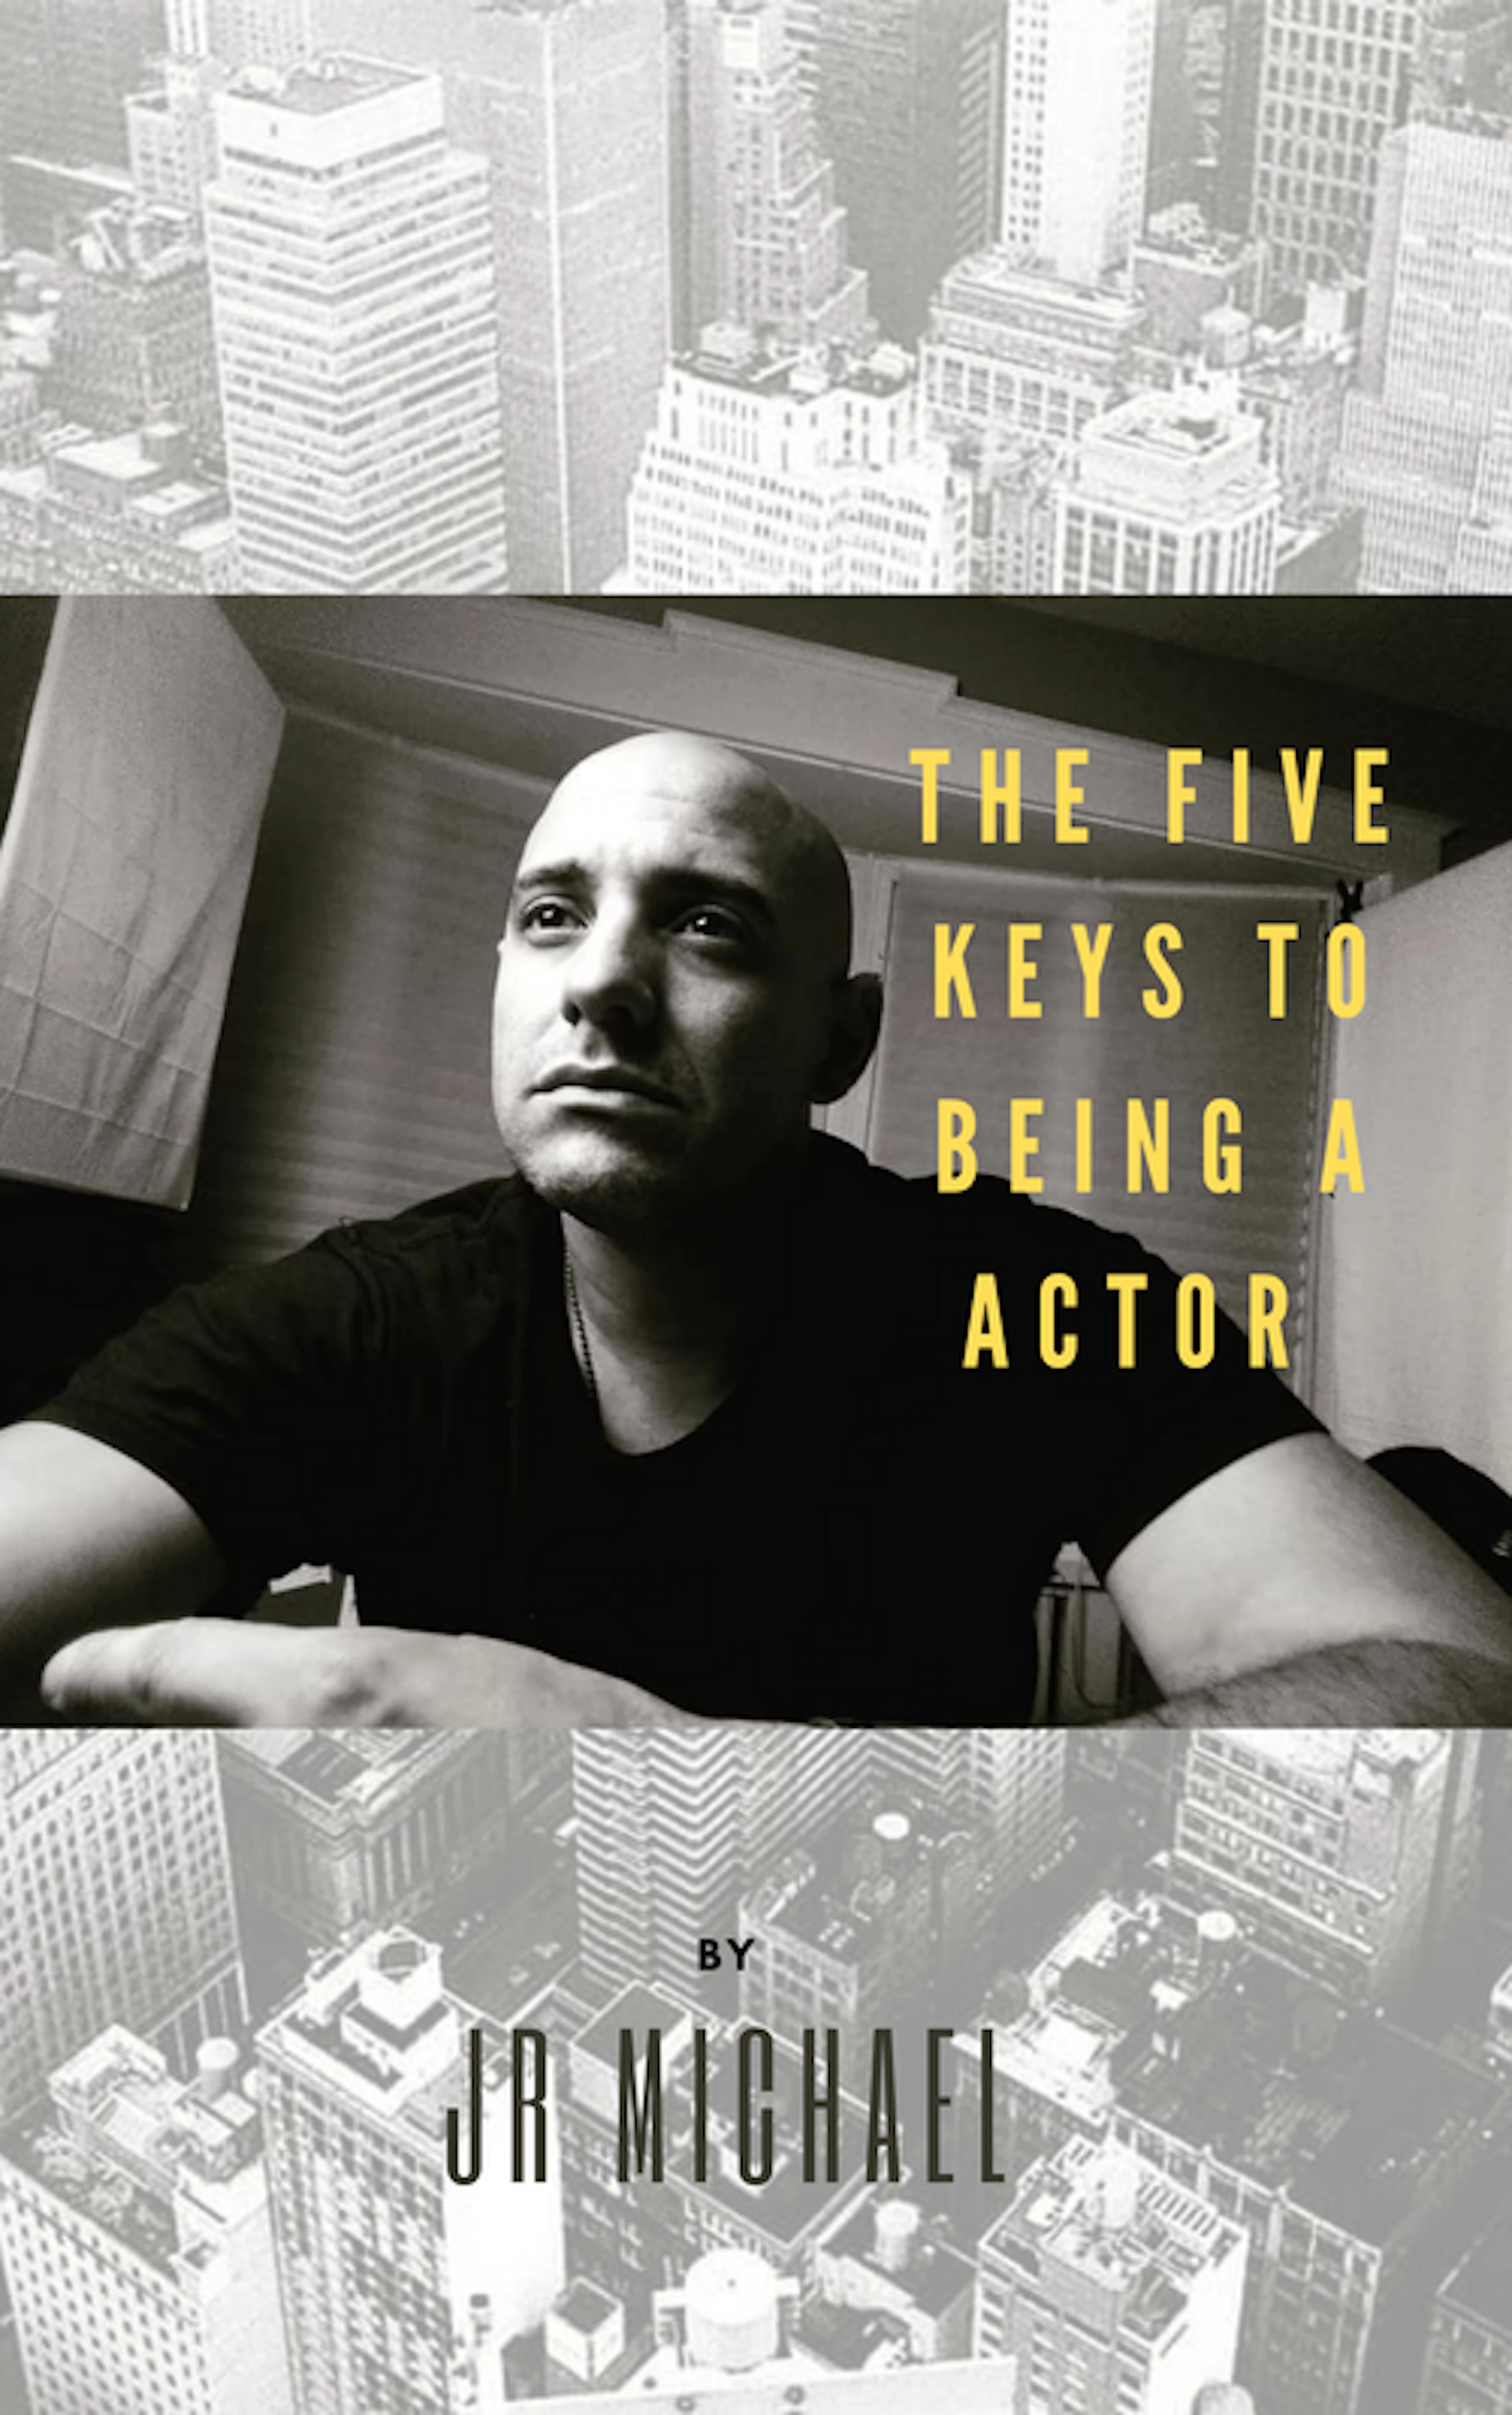 The Five Keys to being a Actor!